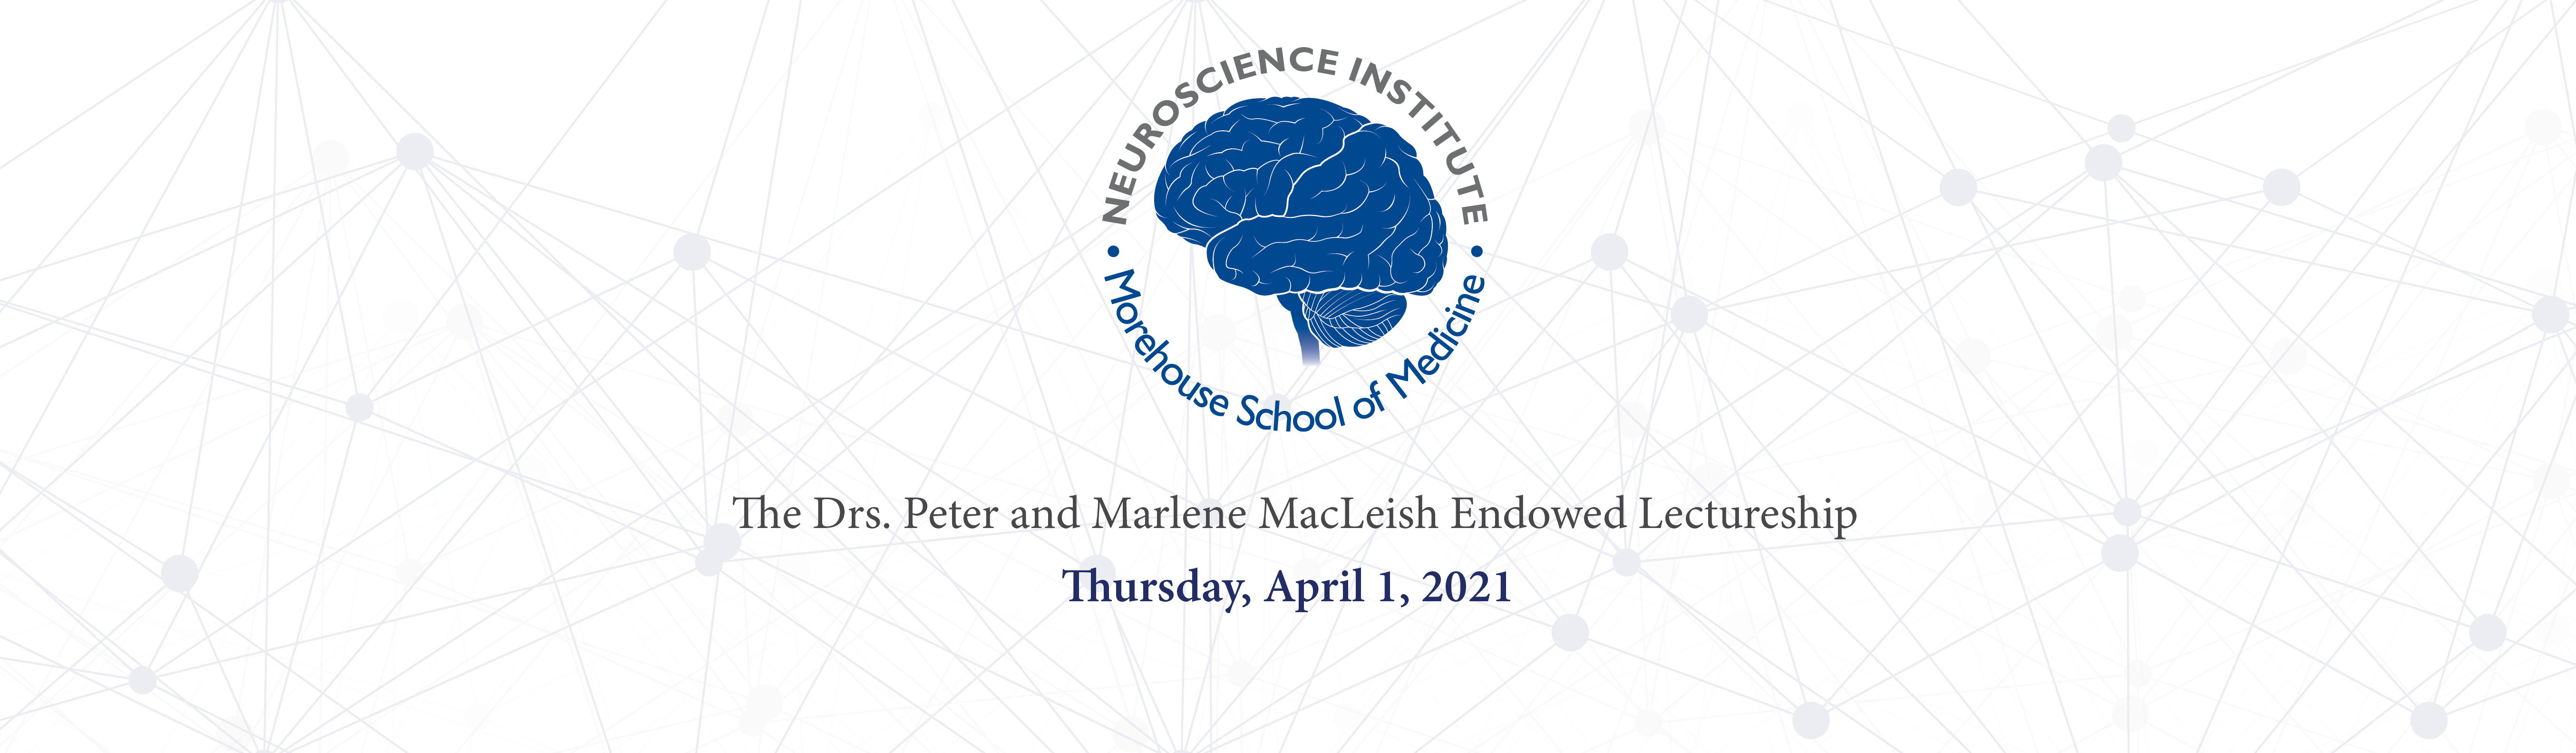 The Drs. Peter and Marlene MacLeish Endowed Lectureship